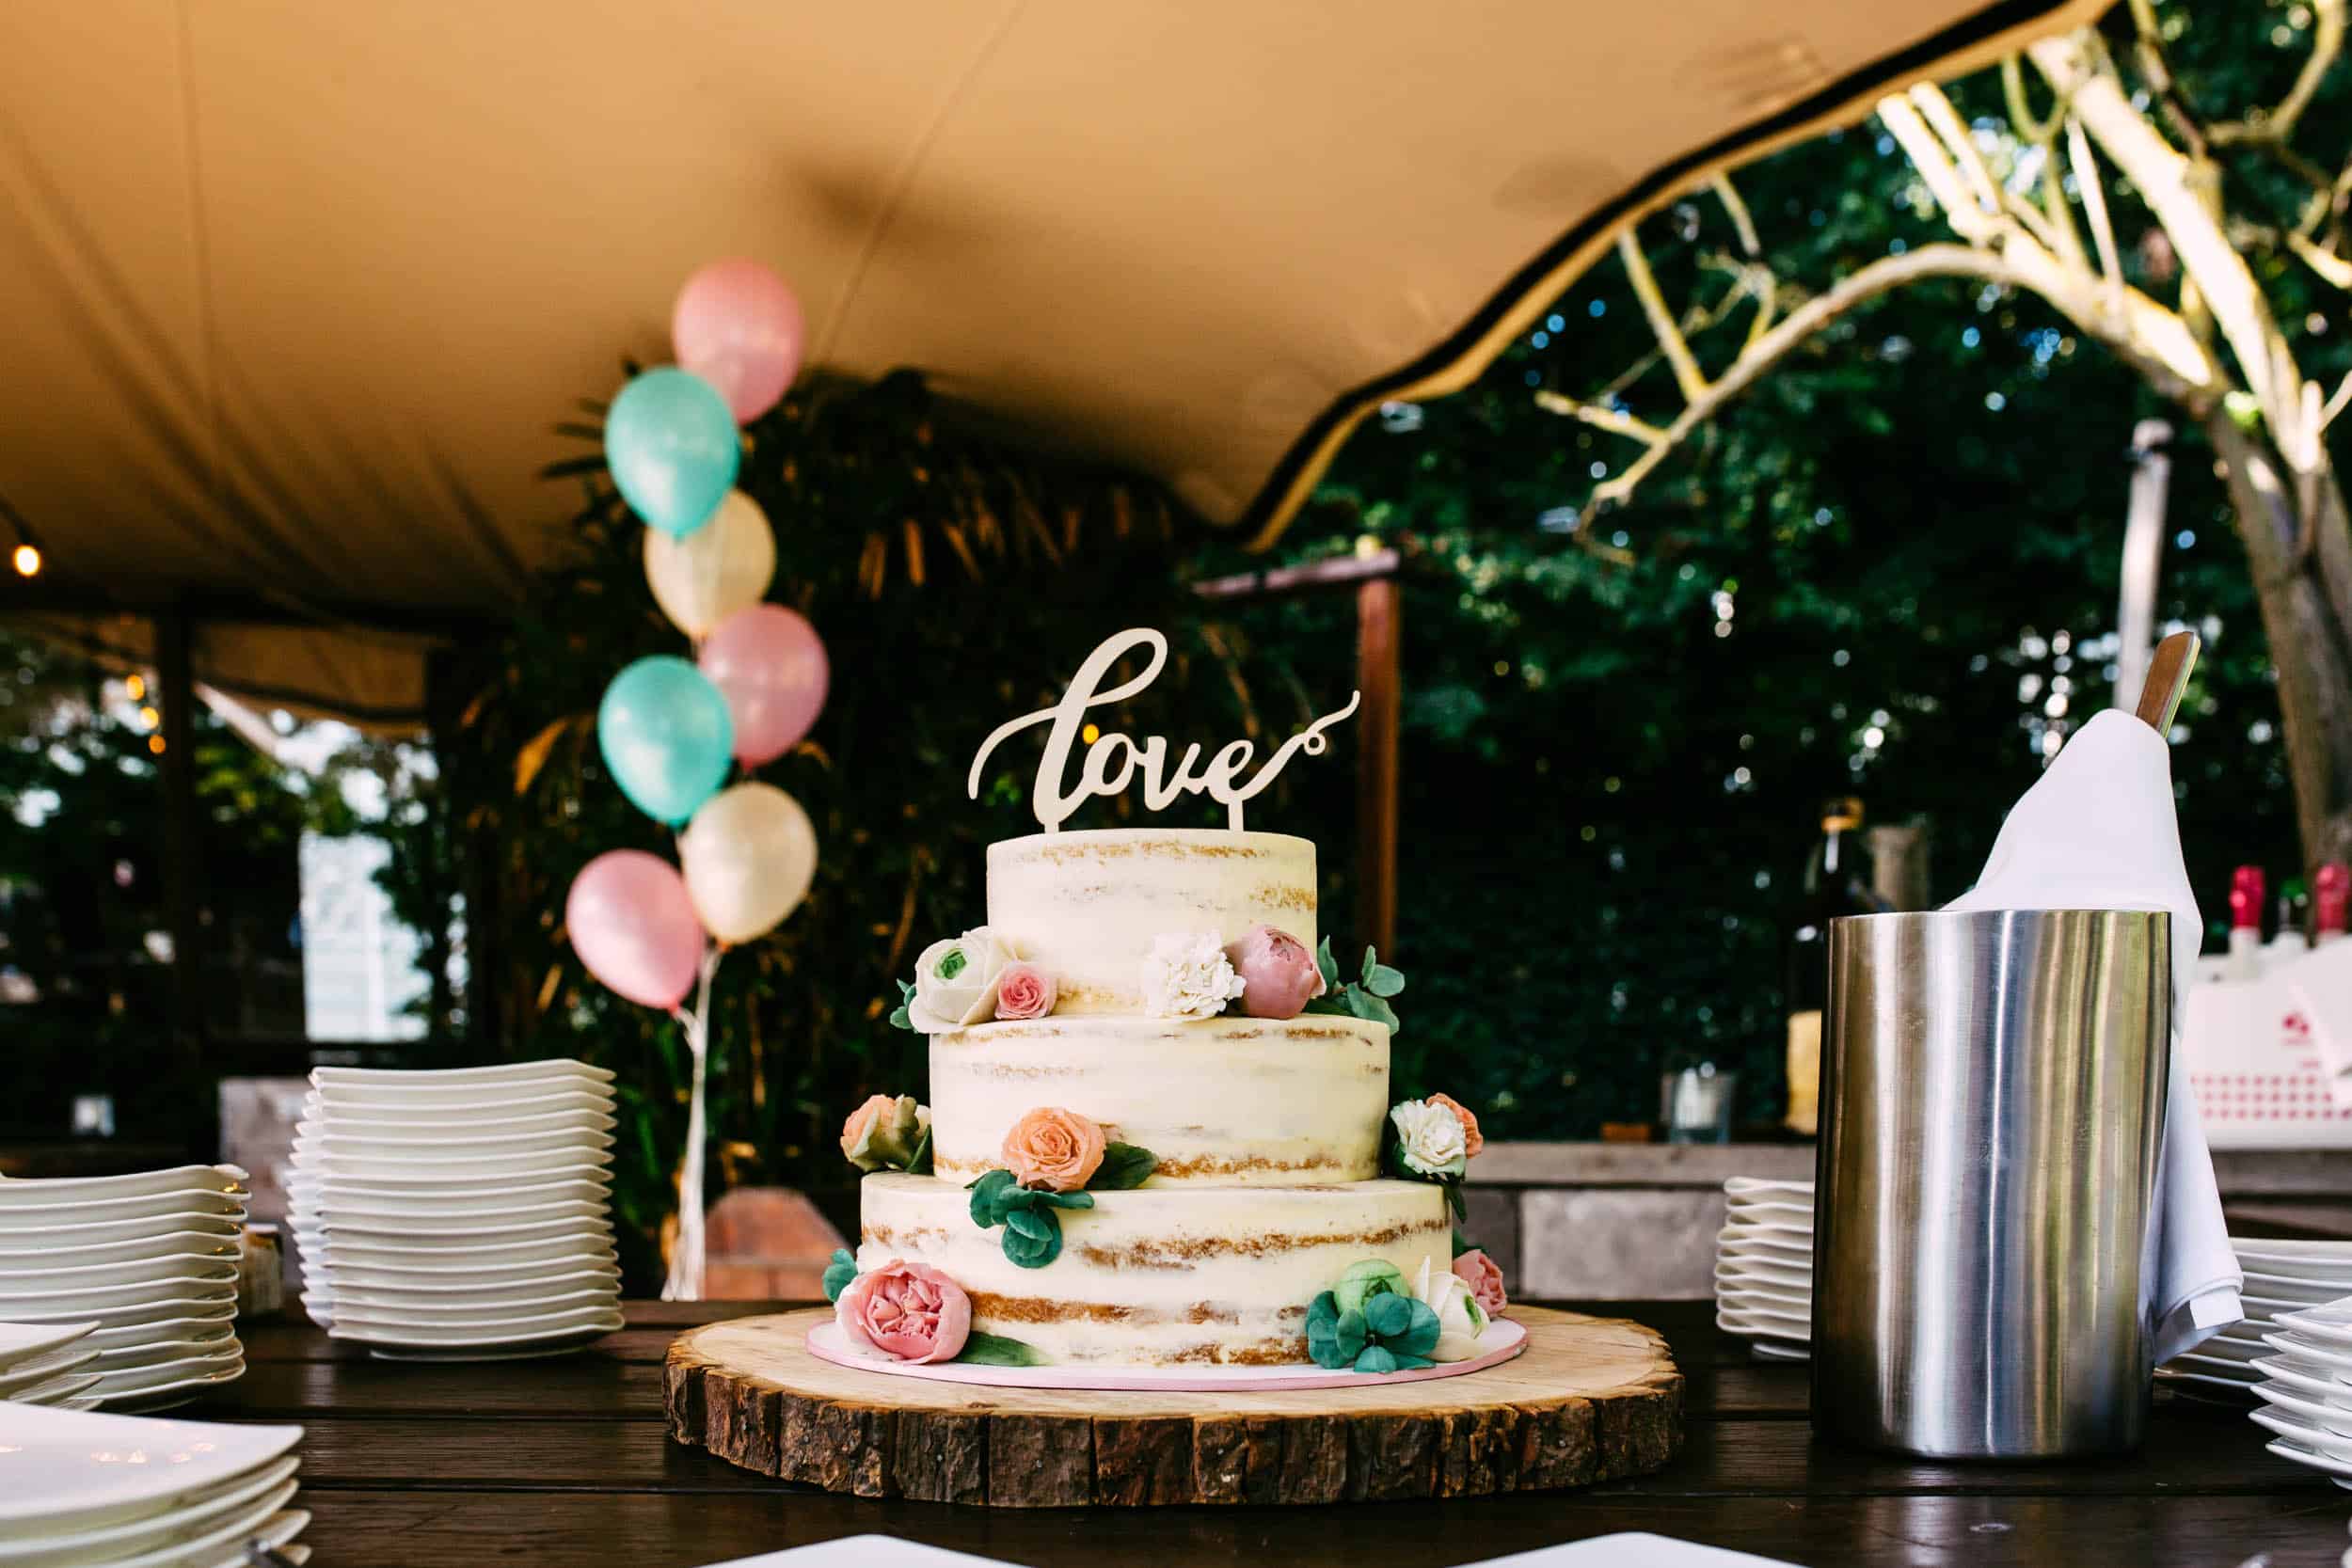 A wedding cake sits on a wooden table at De Viersprong s' Gravenzande.